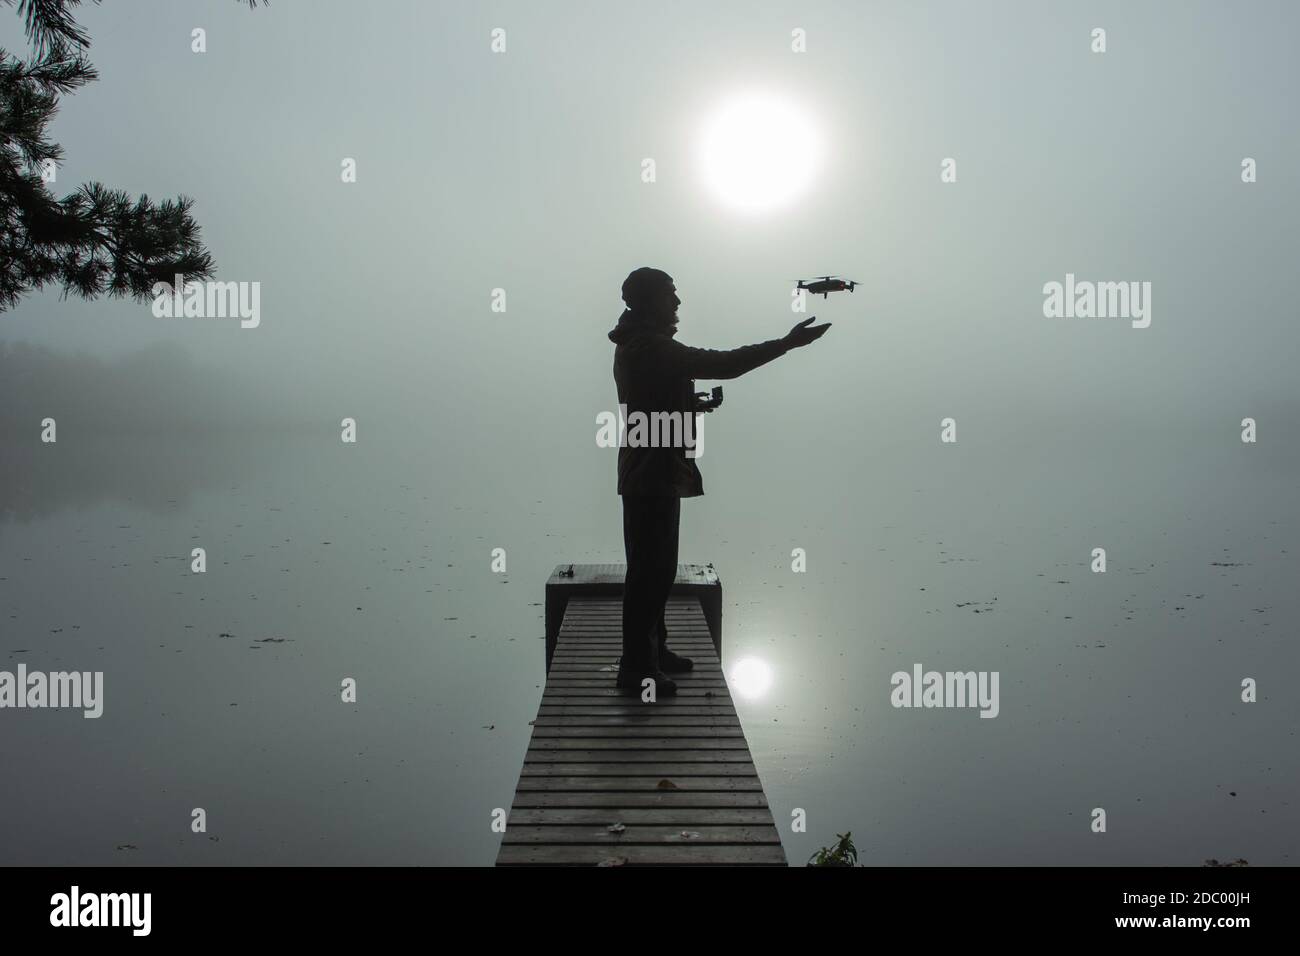 Man playing with the drone. Silhouette against the foggy landscape.Male operating the drone by remote control and having fun. Pilot flying drone. Use Stock Photo